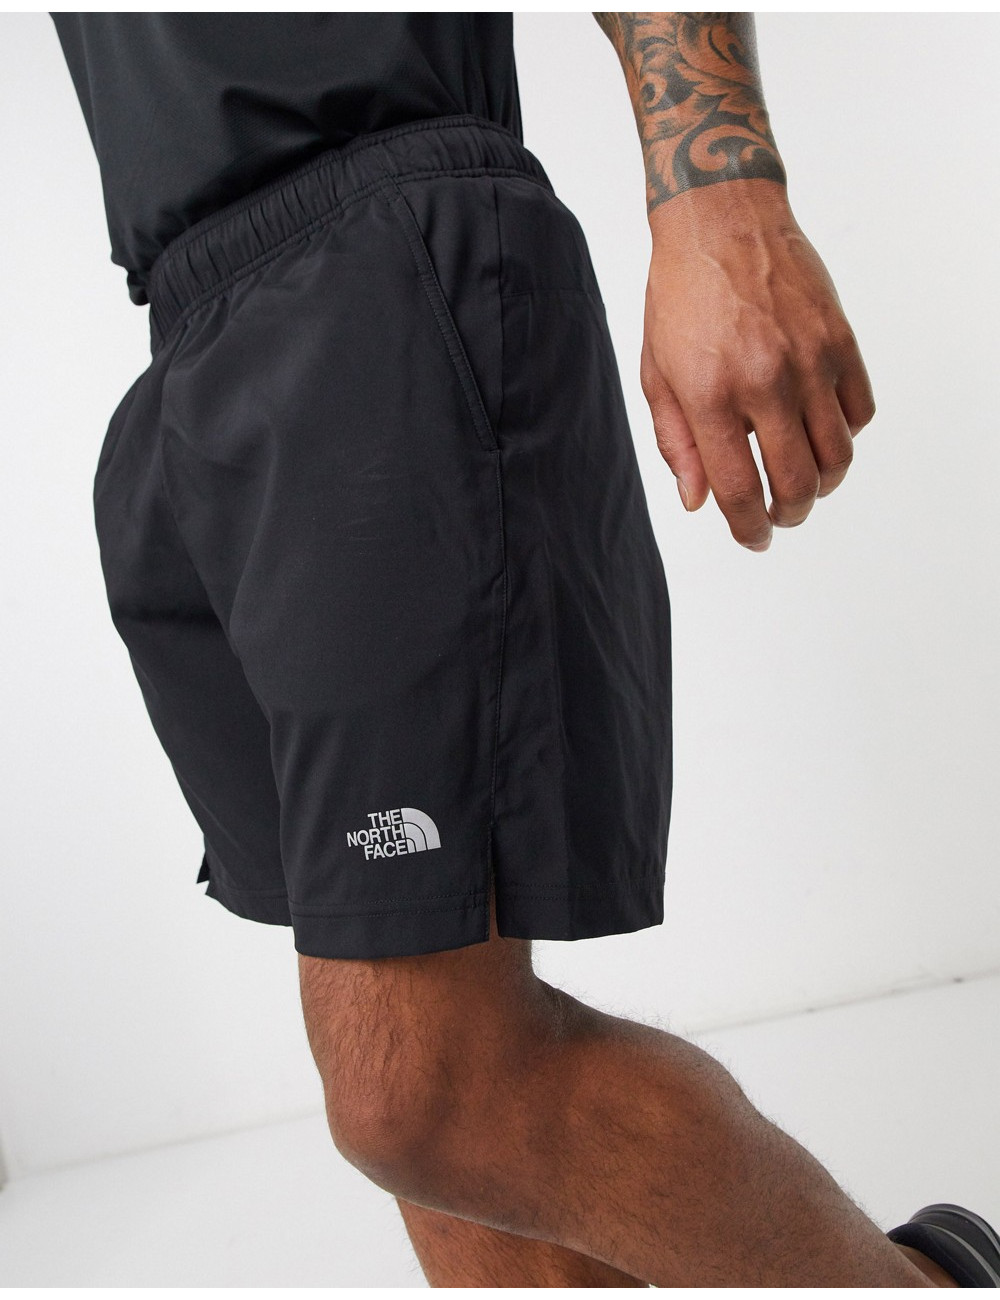 The North Face 24/7 shorts...